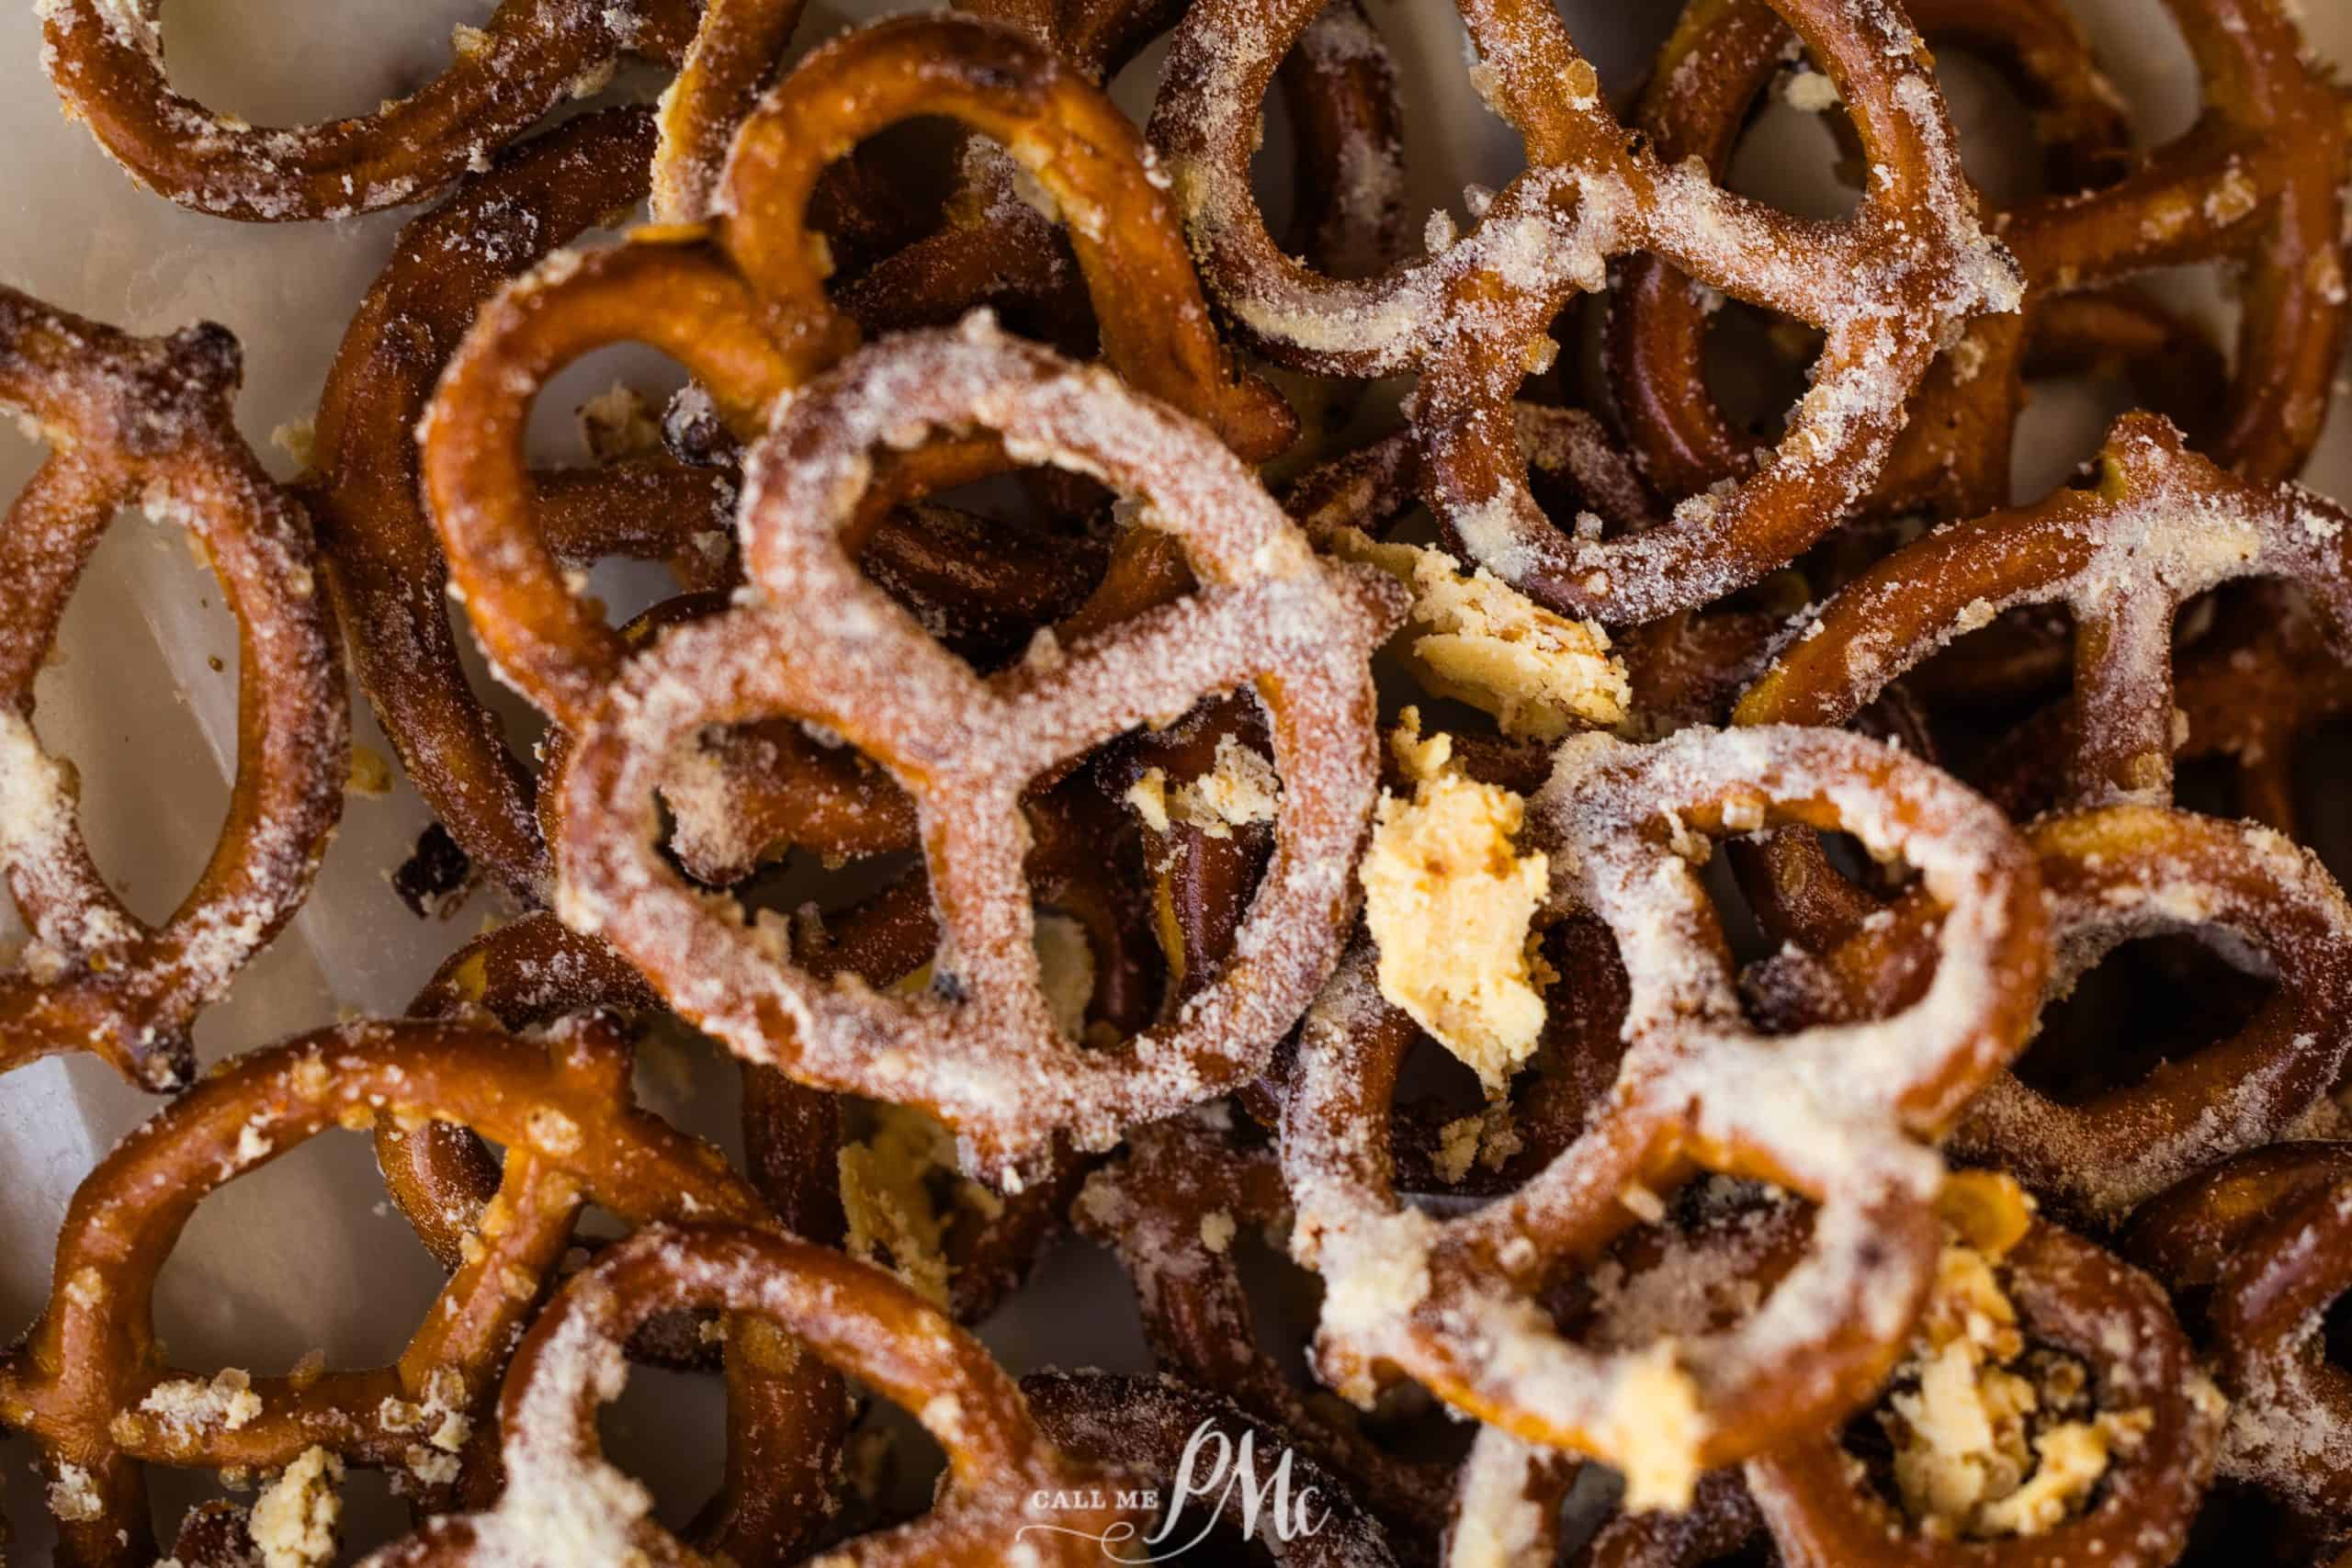 A pile of pretzels on a white plate.